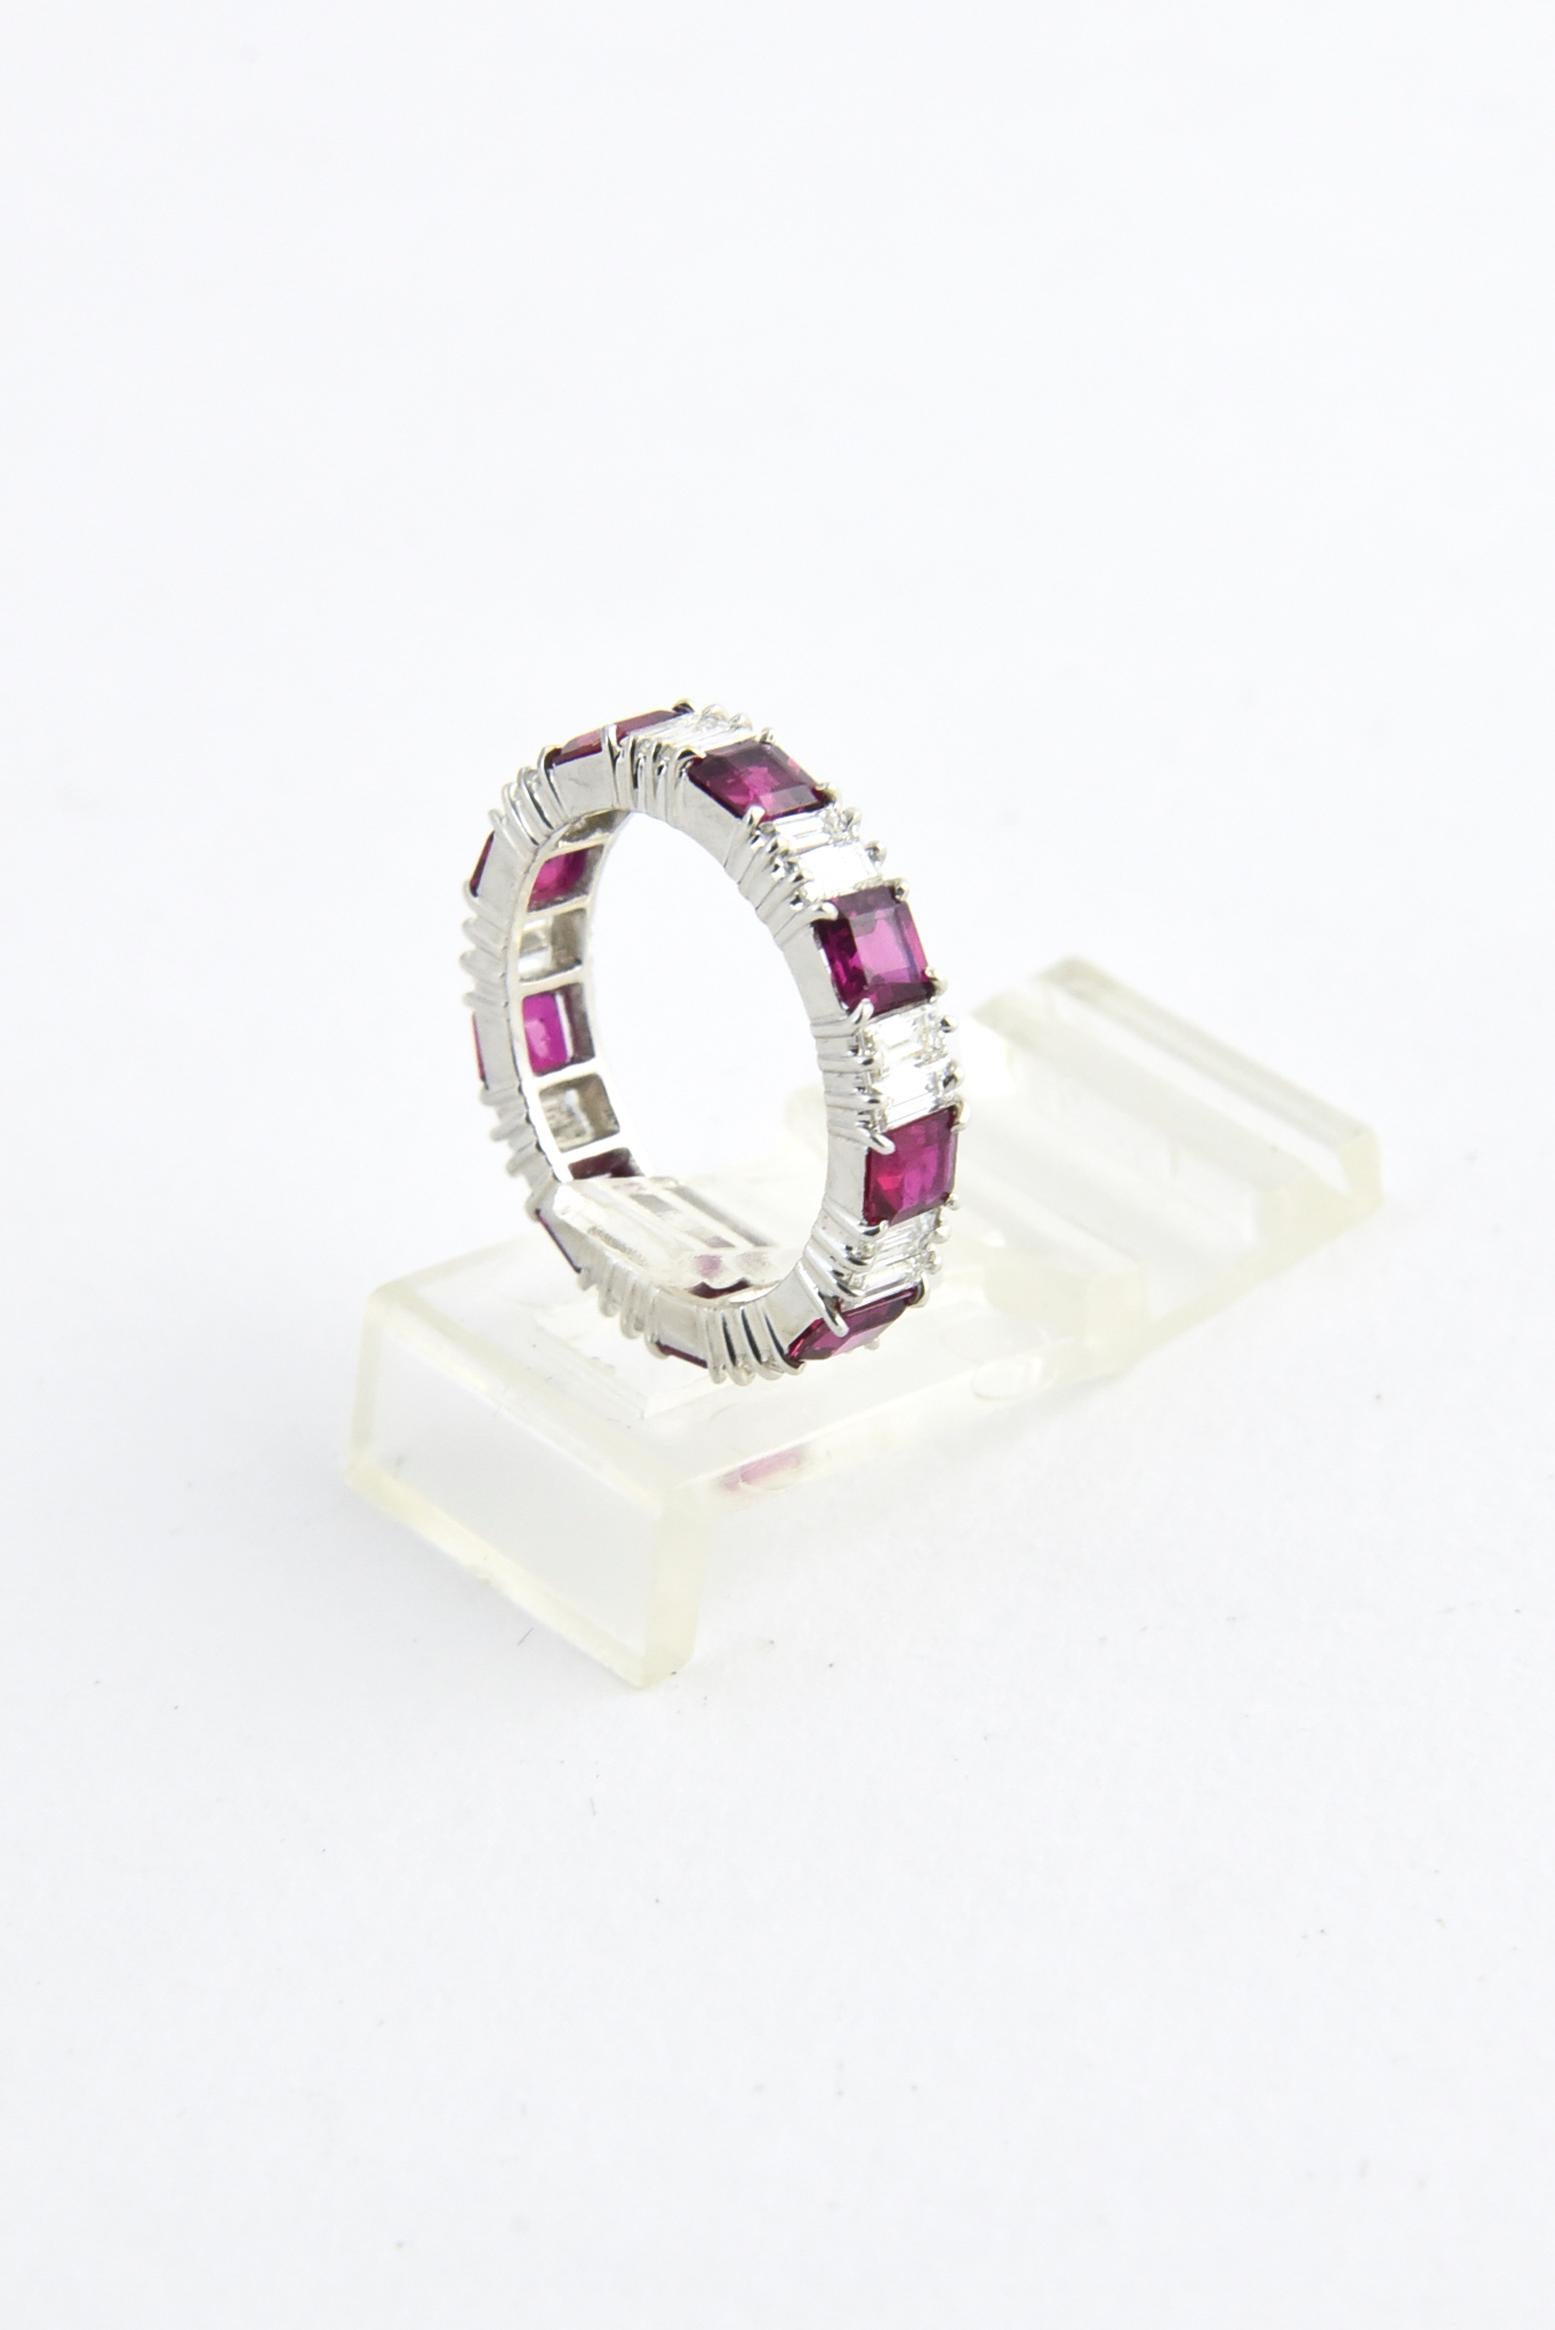 Platinum eternity band ring featuring nine square rubies with an approximate total weight of 5 carats and 18 baguette diamonds with an approximate total weight of 1 carat. No maker's mark. US size 6; cannot be sized.